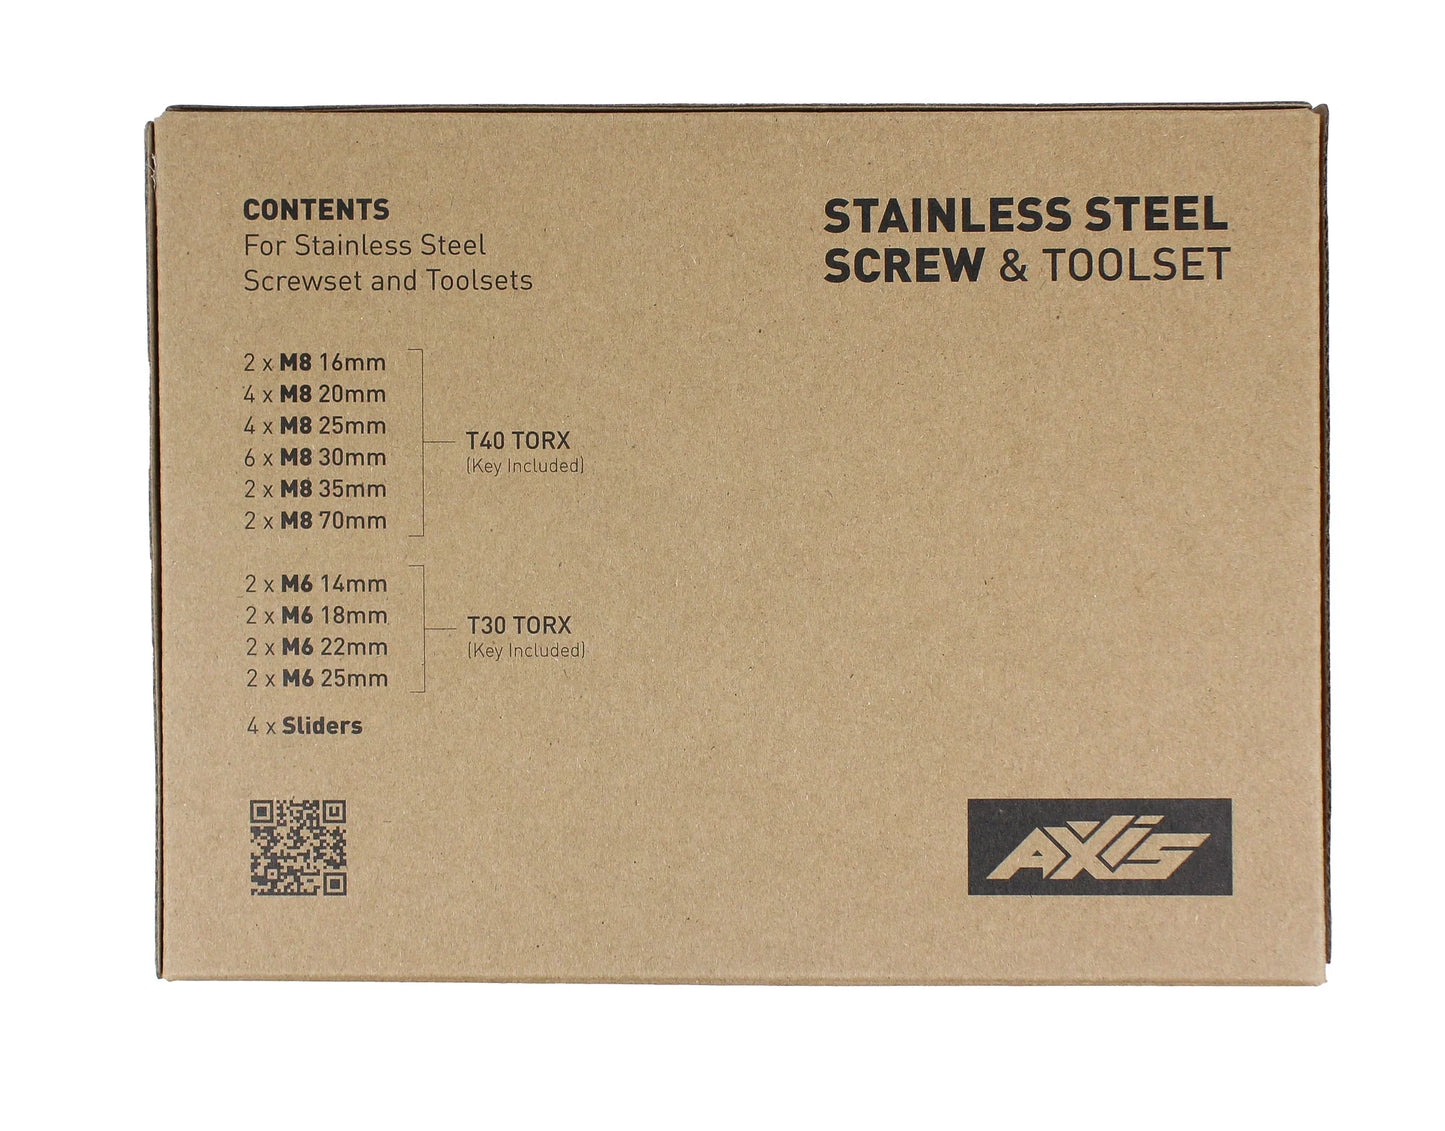 AXIS STAINLESS Screwset and Toolset Box